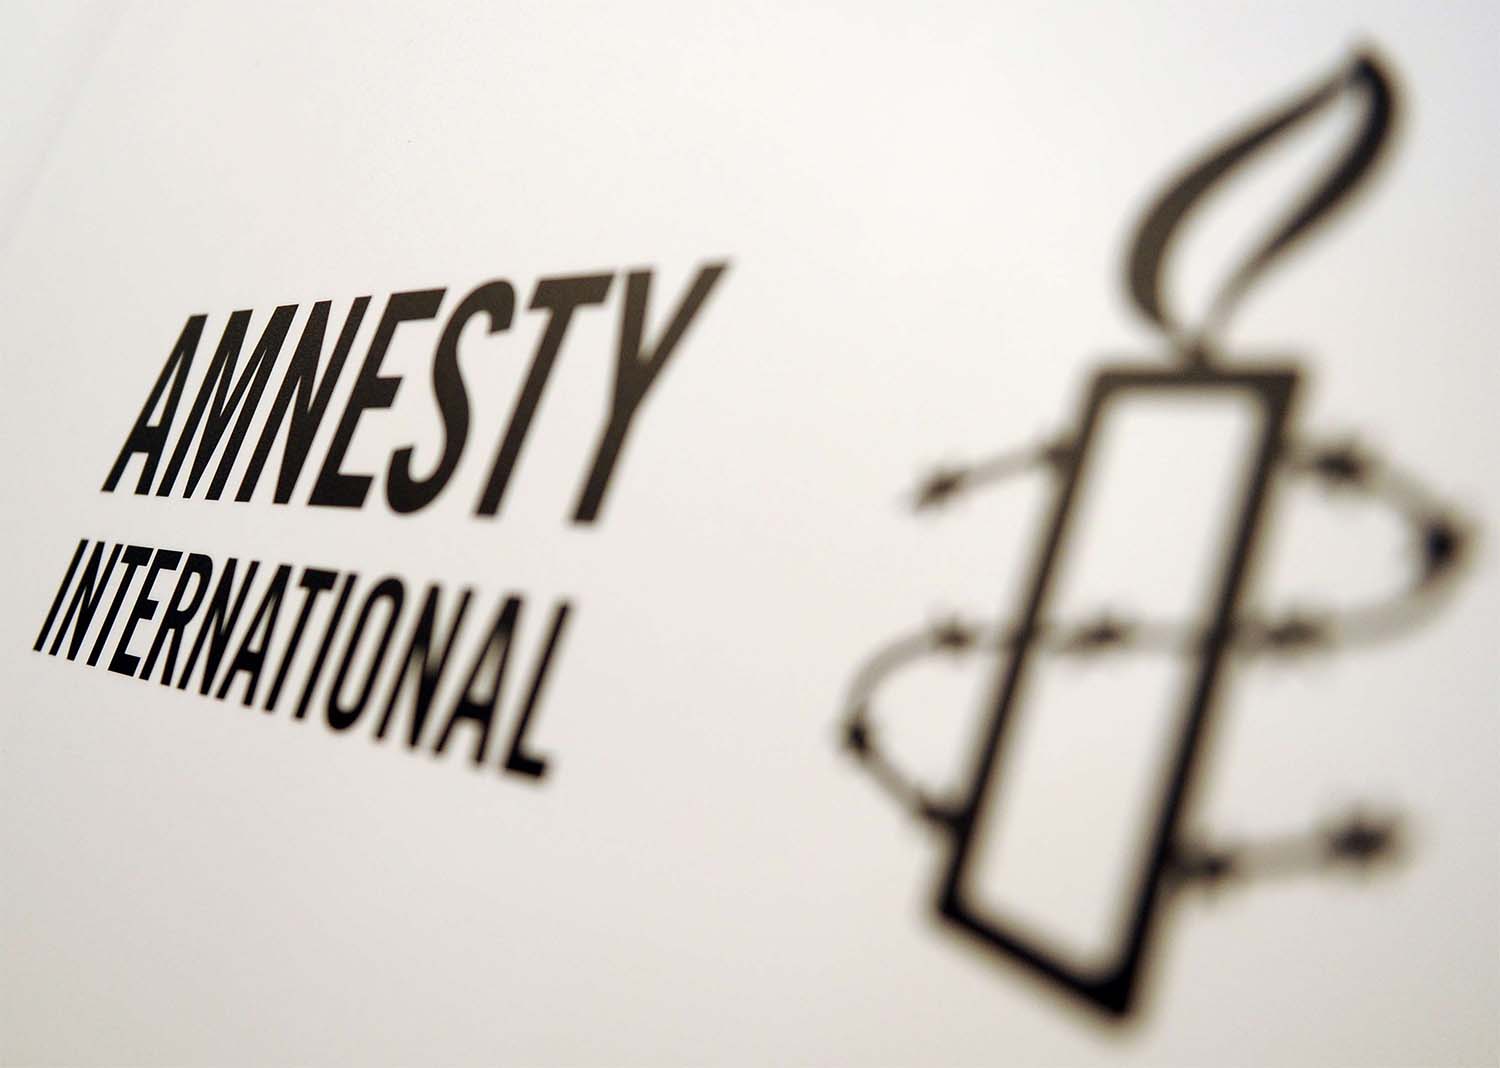 Morocco is still waiting for Amnesty International to provide evidence of its phone hacking accusations